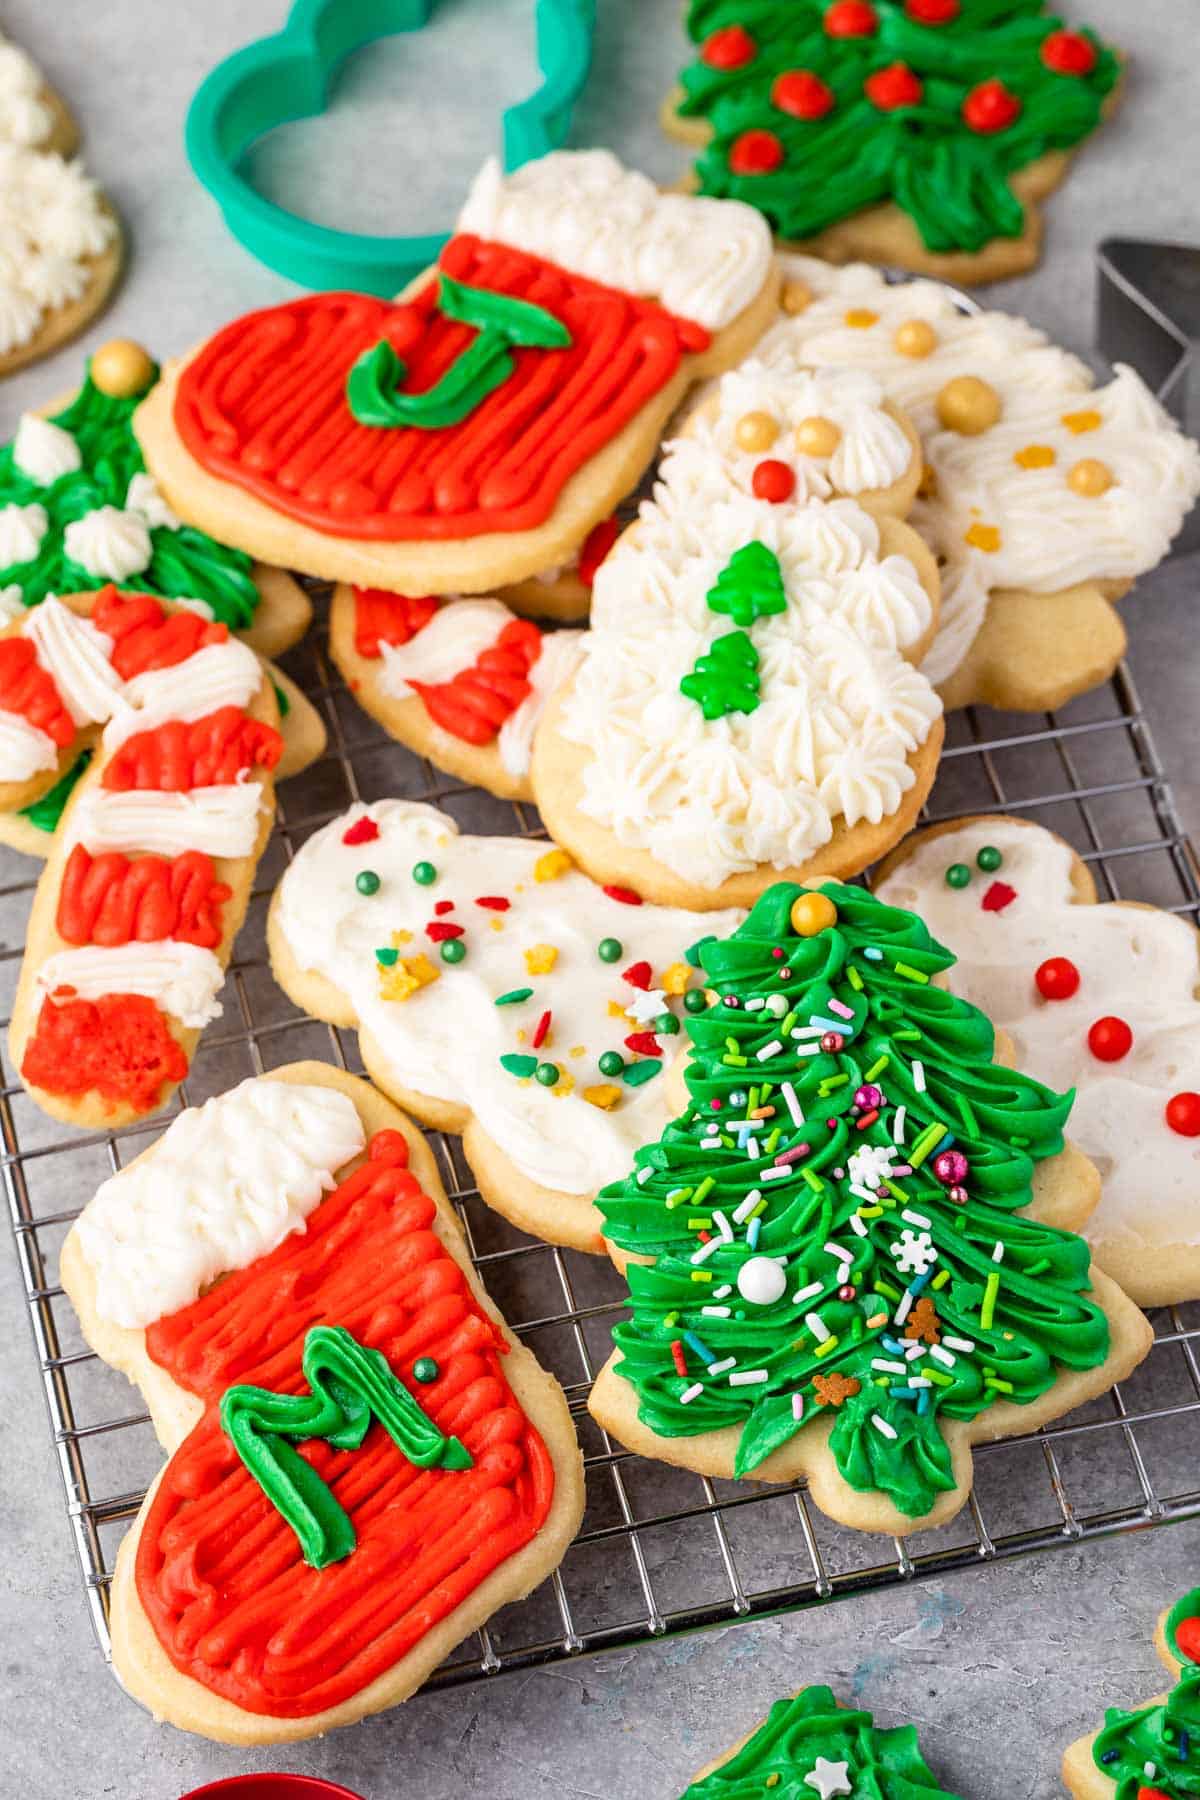 10 Tools/Supplies for Fancy Sugar Cookies and A GIVEAWAY!